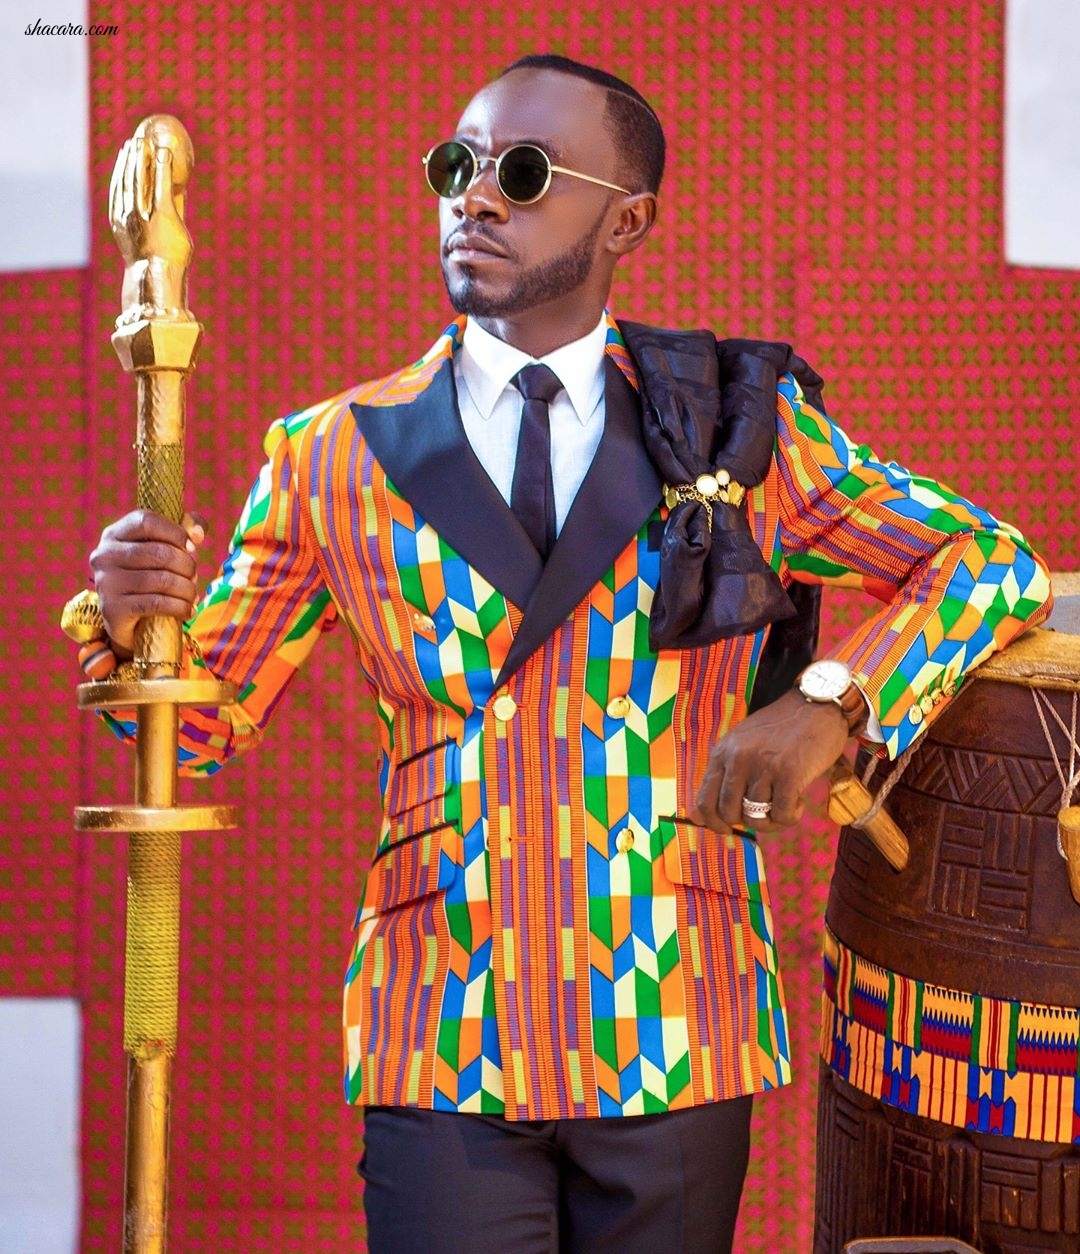 Why Okyeame Kwame’s Made In Ghana Campaign Could Change The Course Of Mens Fashion In Ghana, Africa